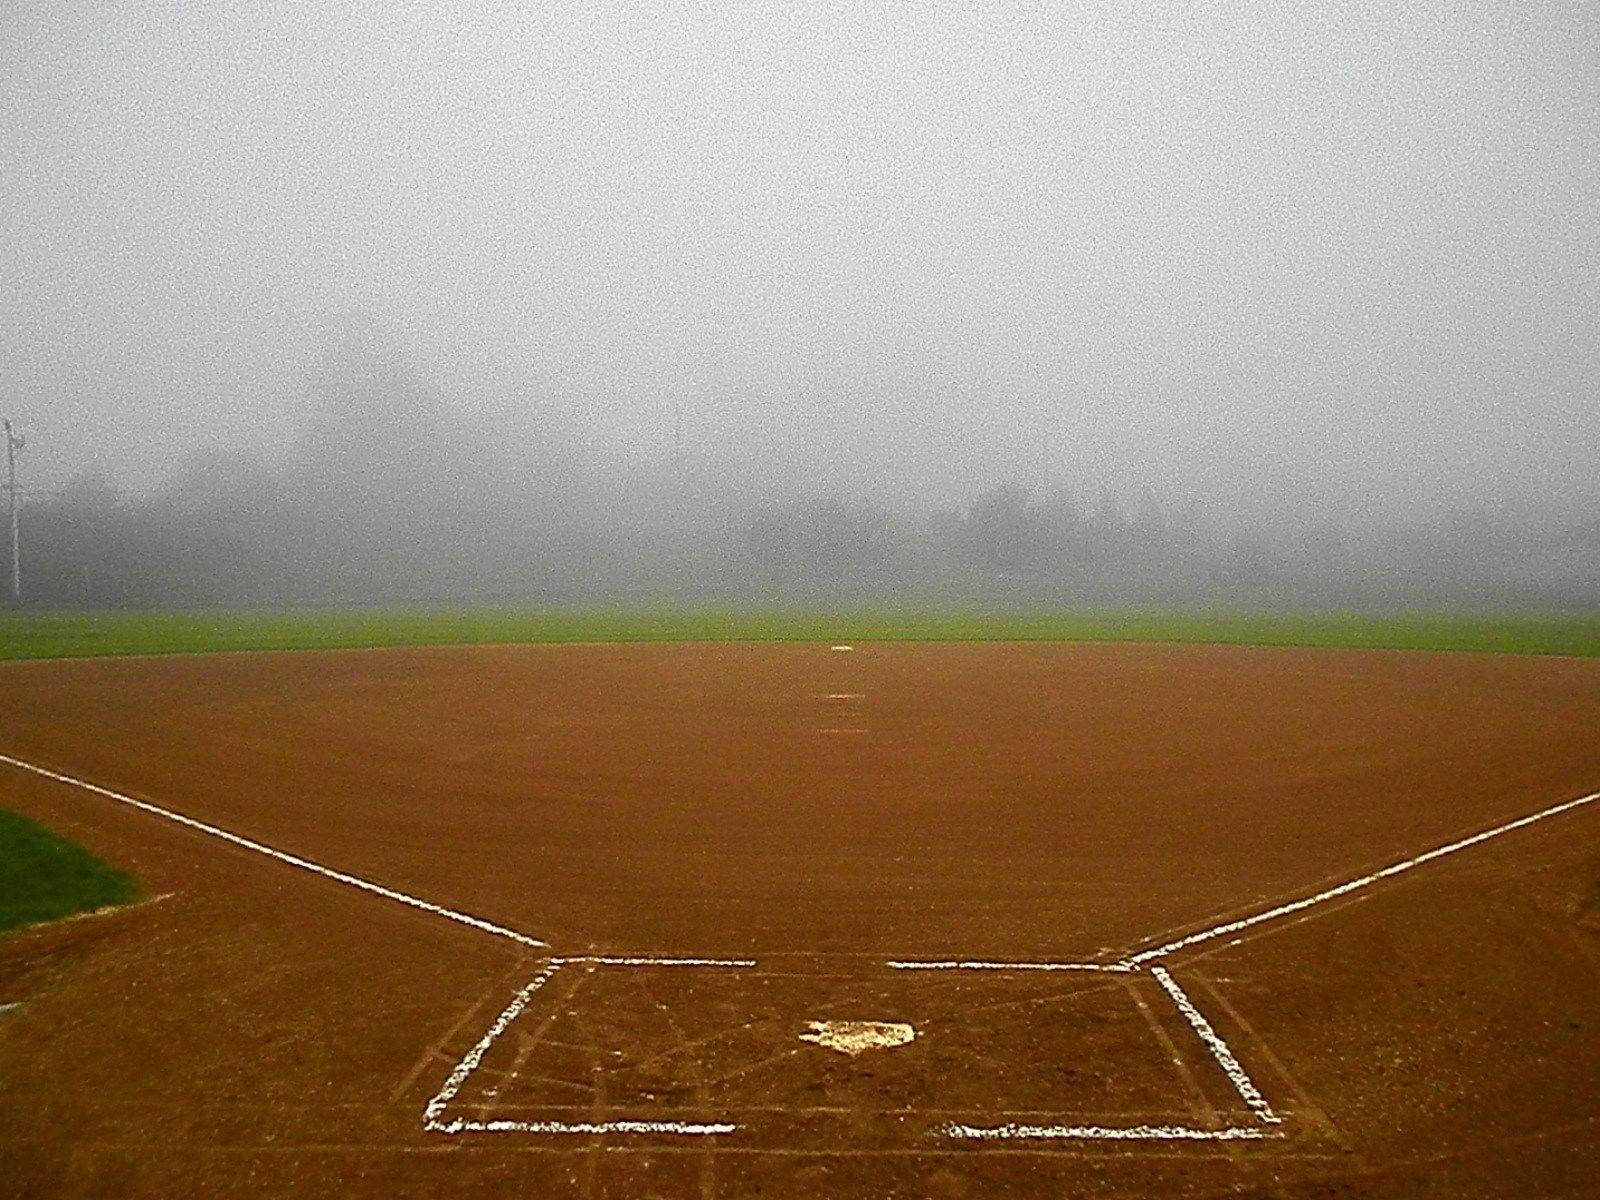 Misty Arena Of Awesome Softball Wallpaper